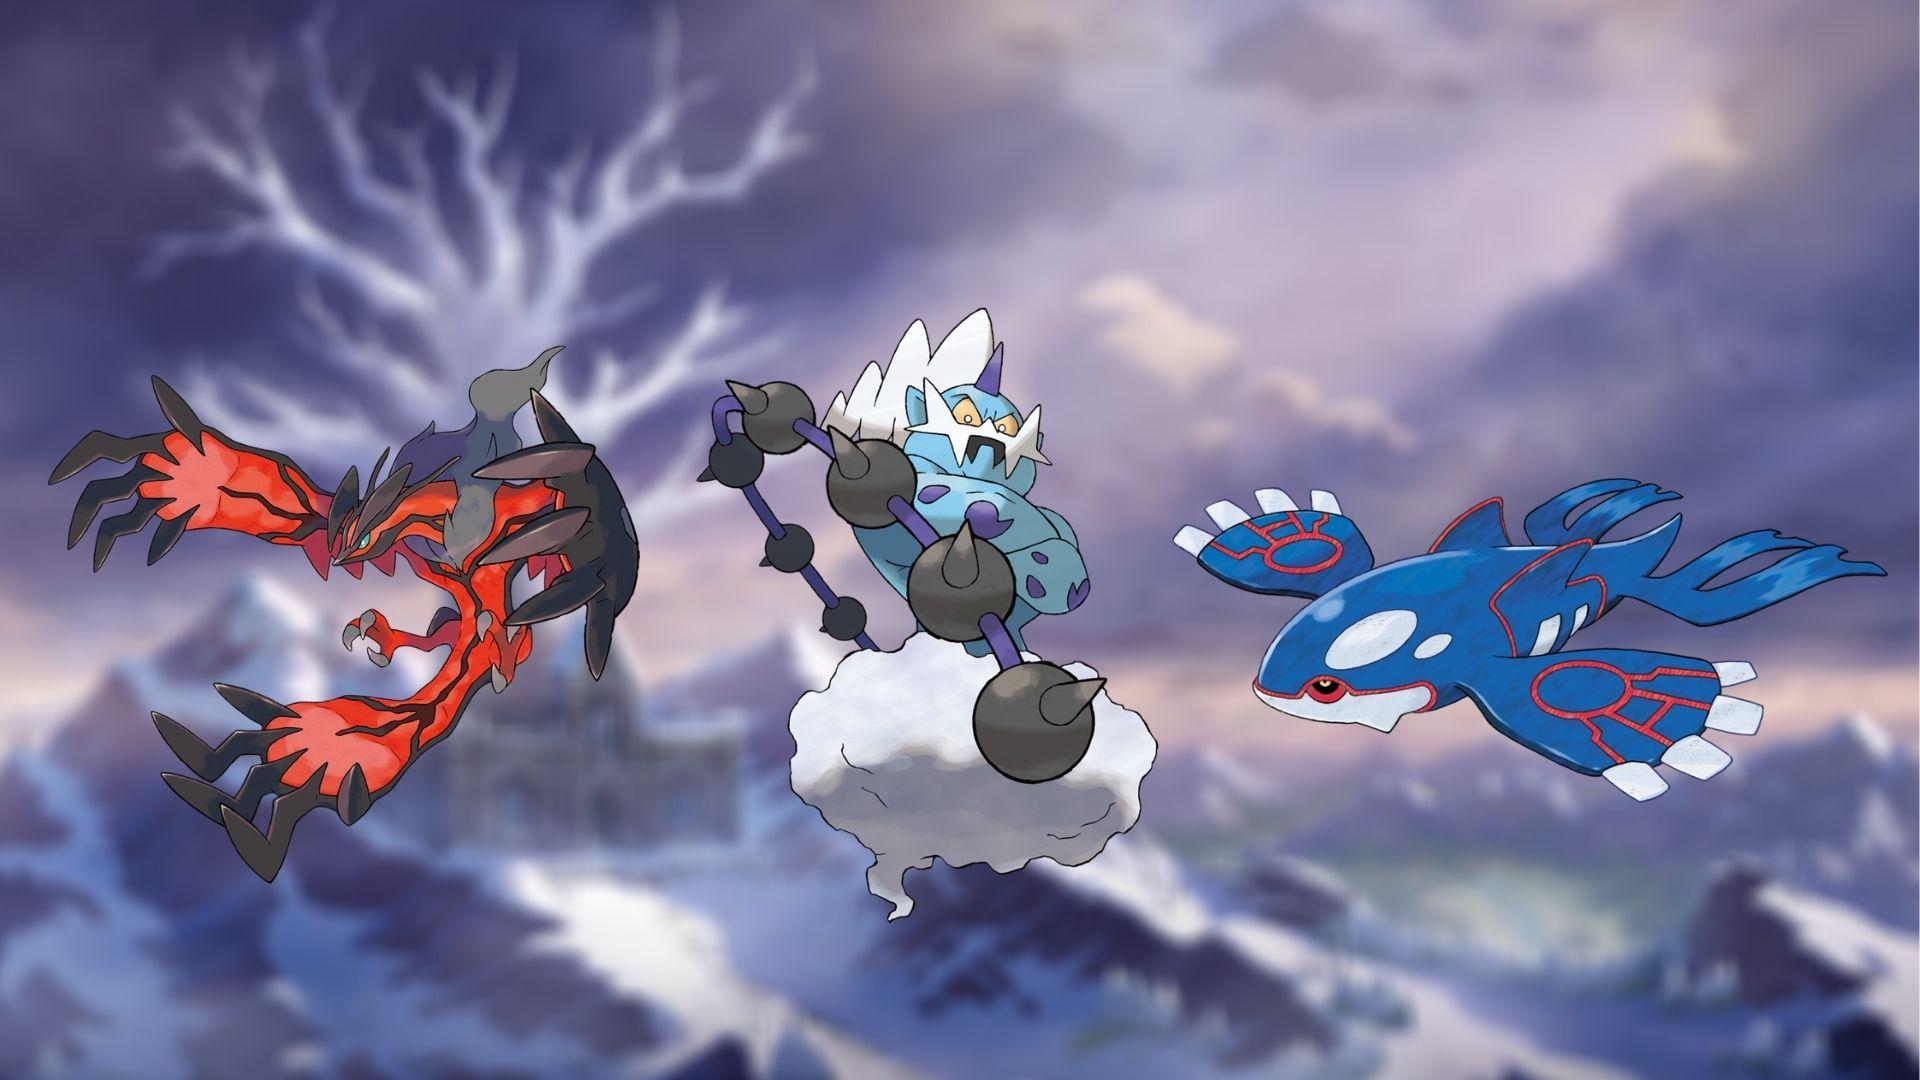 Version exclusives can now be found in both Pokemon Sword AND Shield -  Dexerto